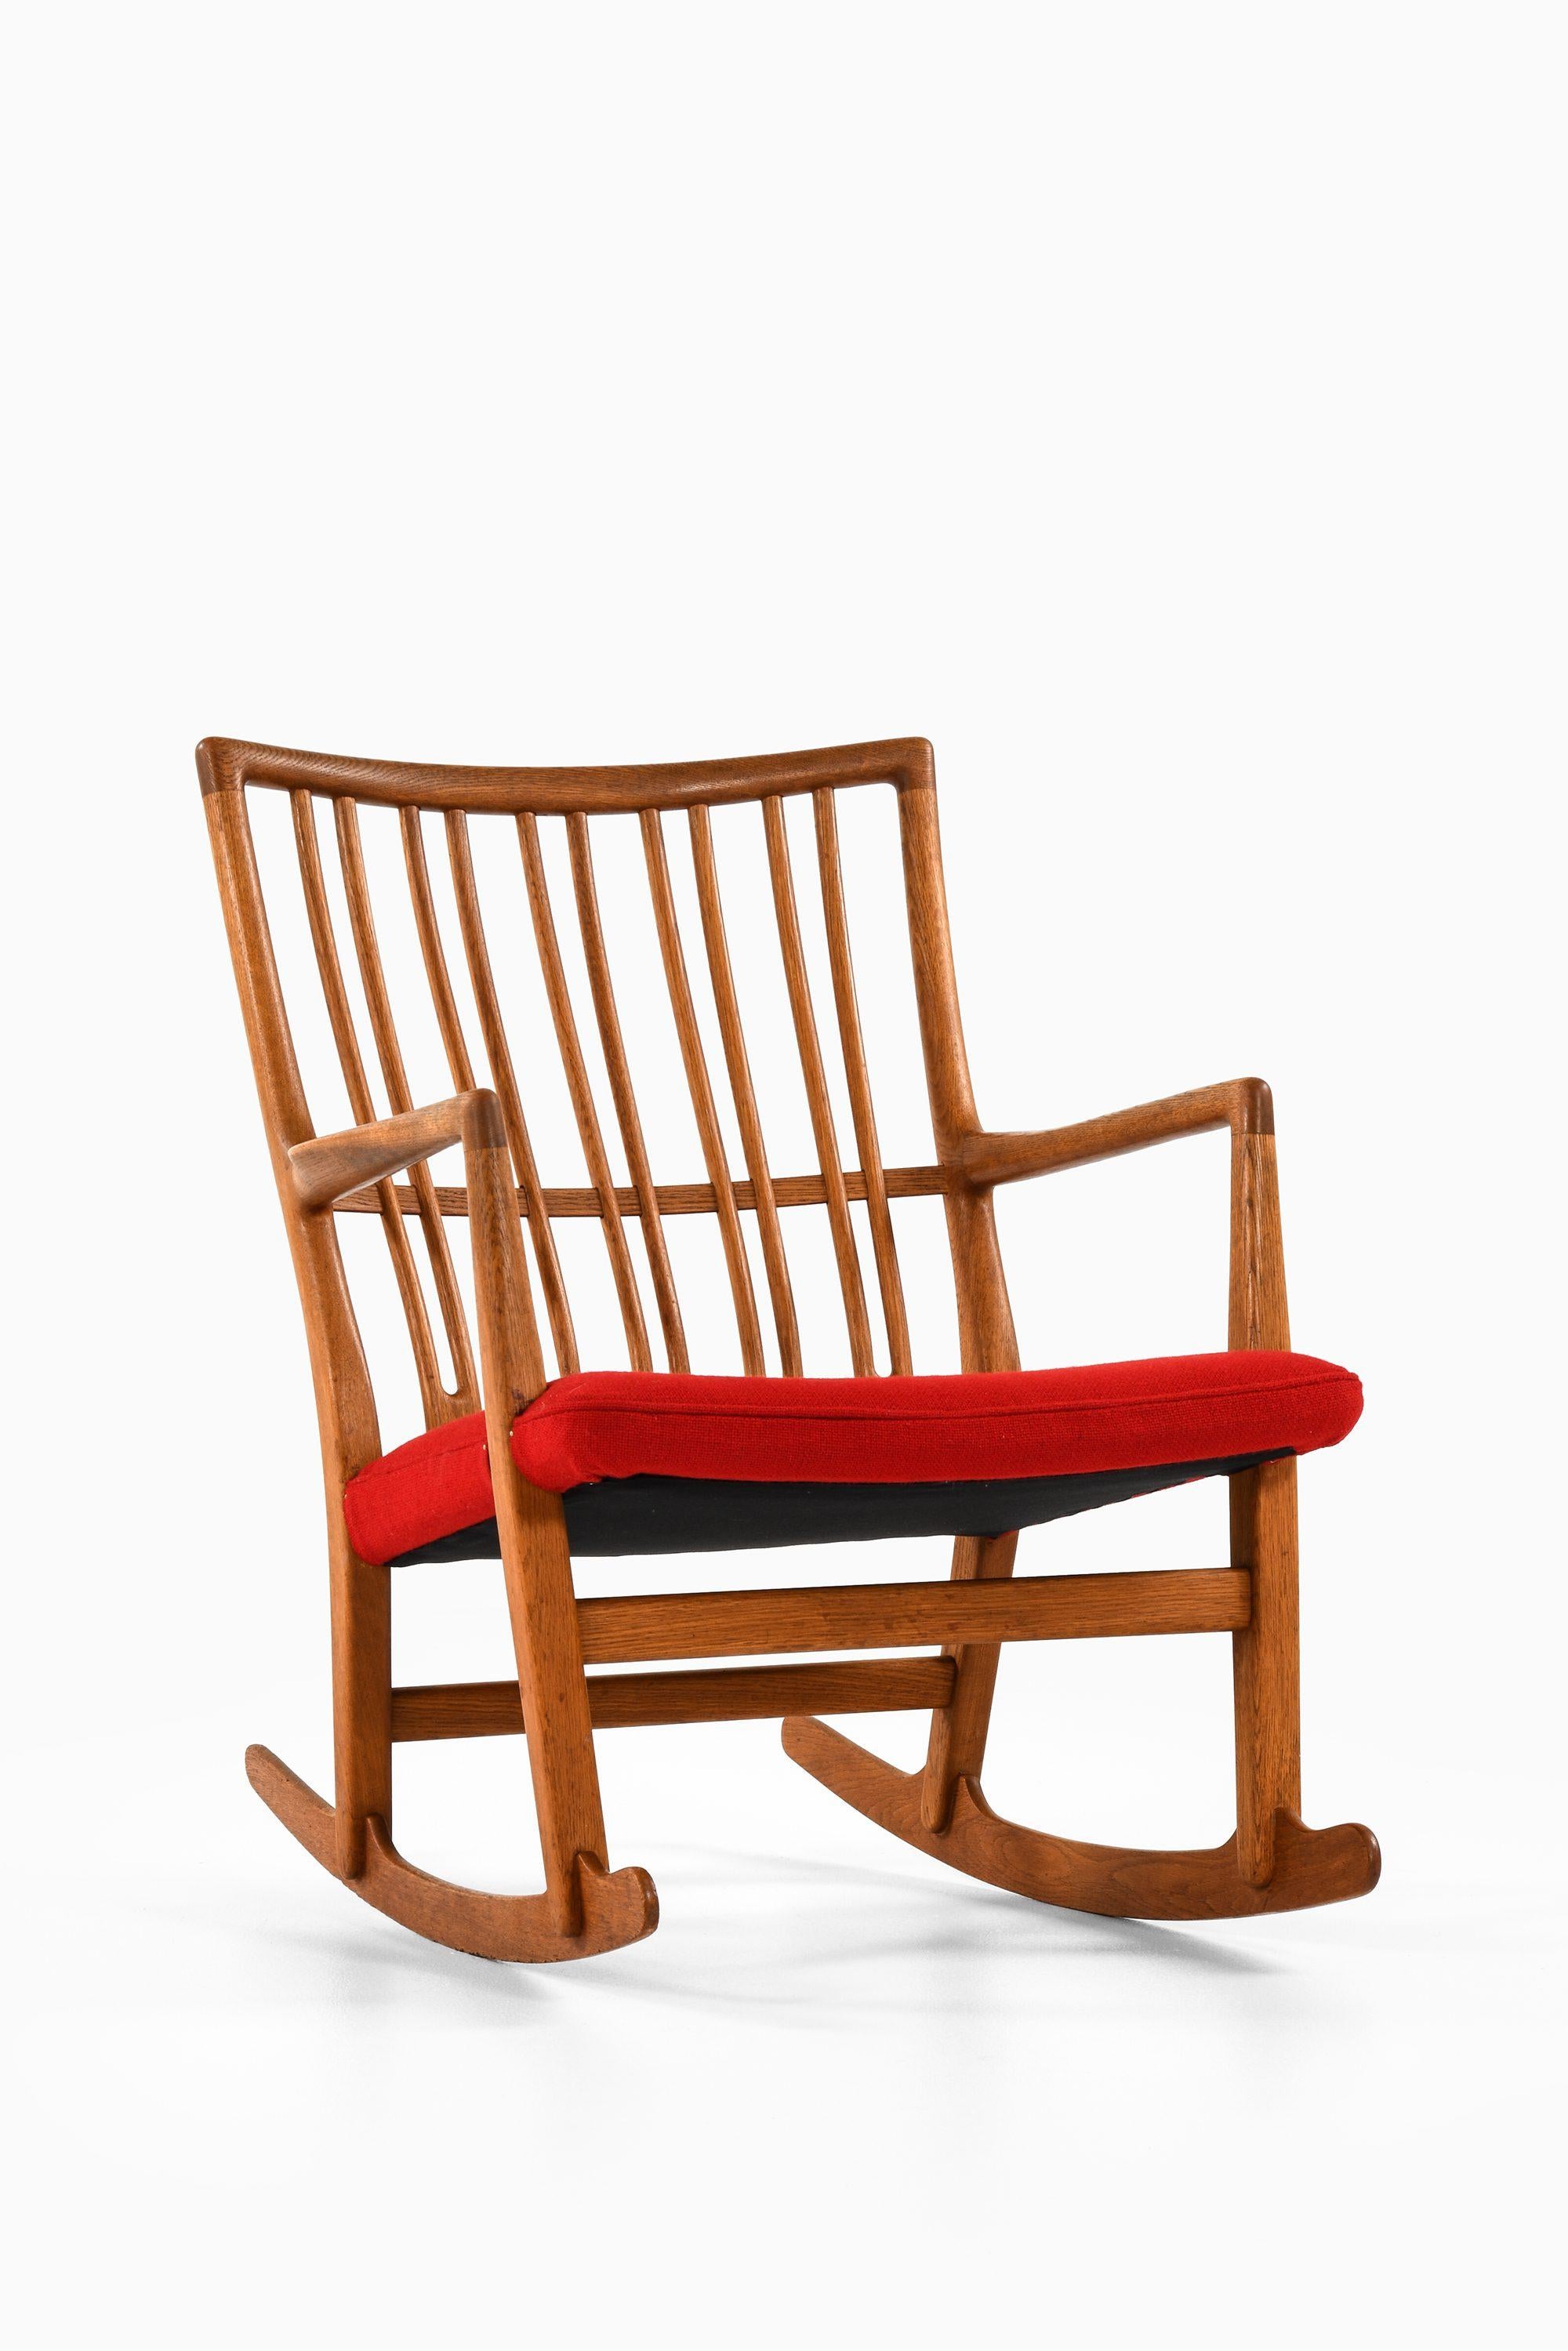 Rocking Chair in Oak with Newly Reupholstered Wool Fabric by Hans Wegner, 1950's

Additional Information:
Material: Oak and newly reupholstered in wool fabric
Style: Mid century, Scandinavian
Rare rocking chair model ML-33
Produced by Mikael Laursen